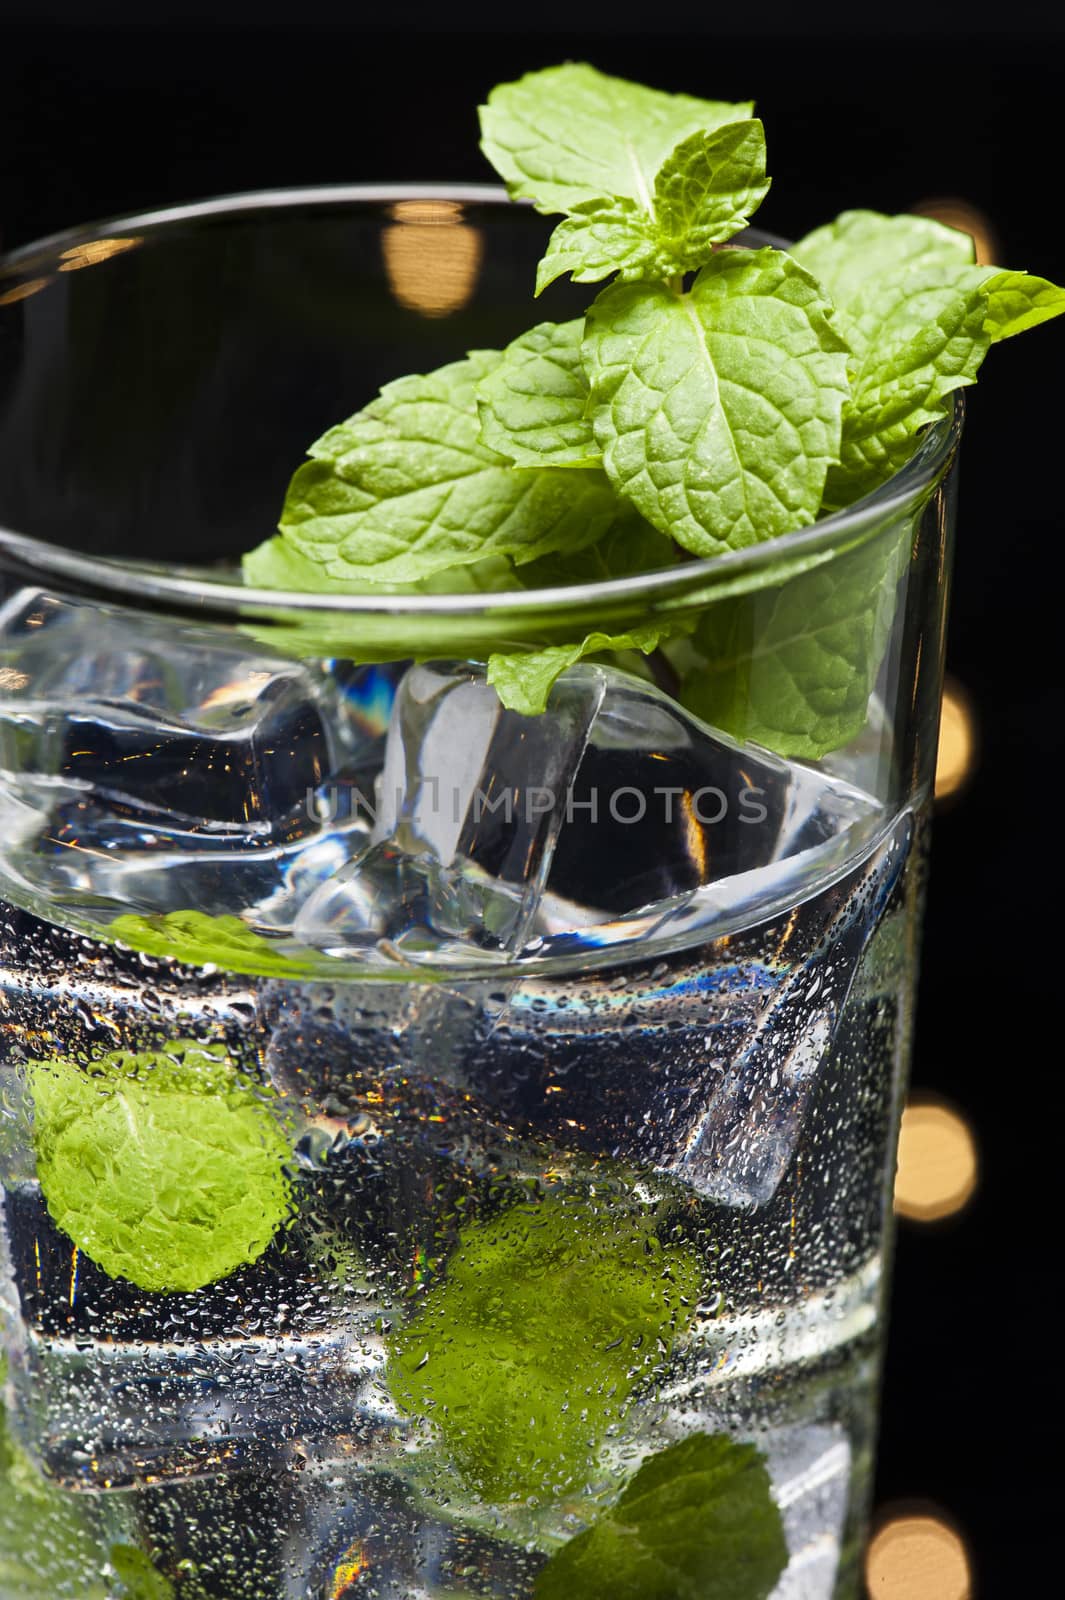 
Green Mojito cocktail with fresh mint leaves